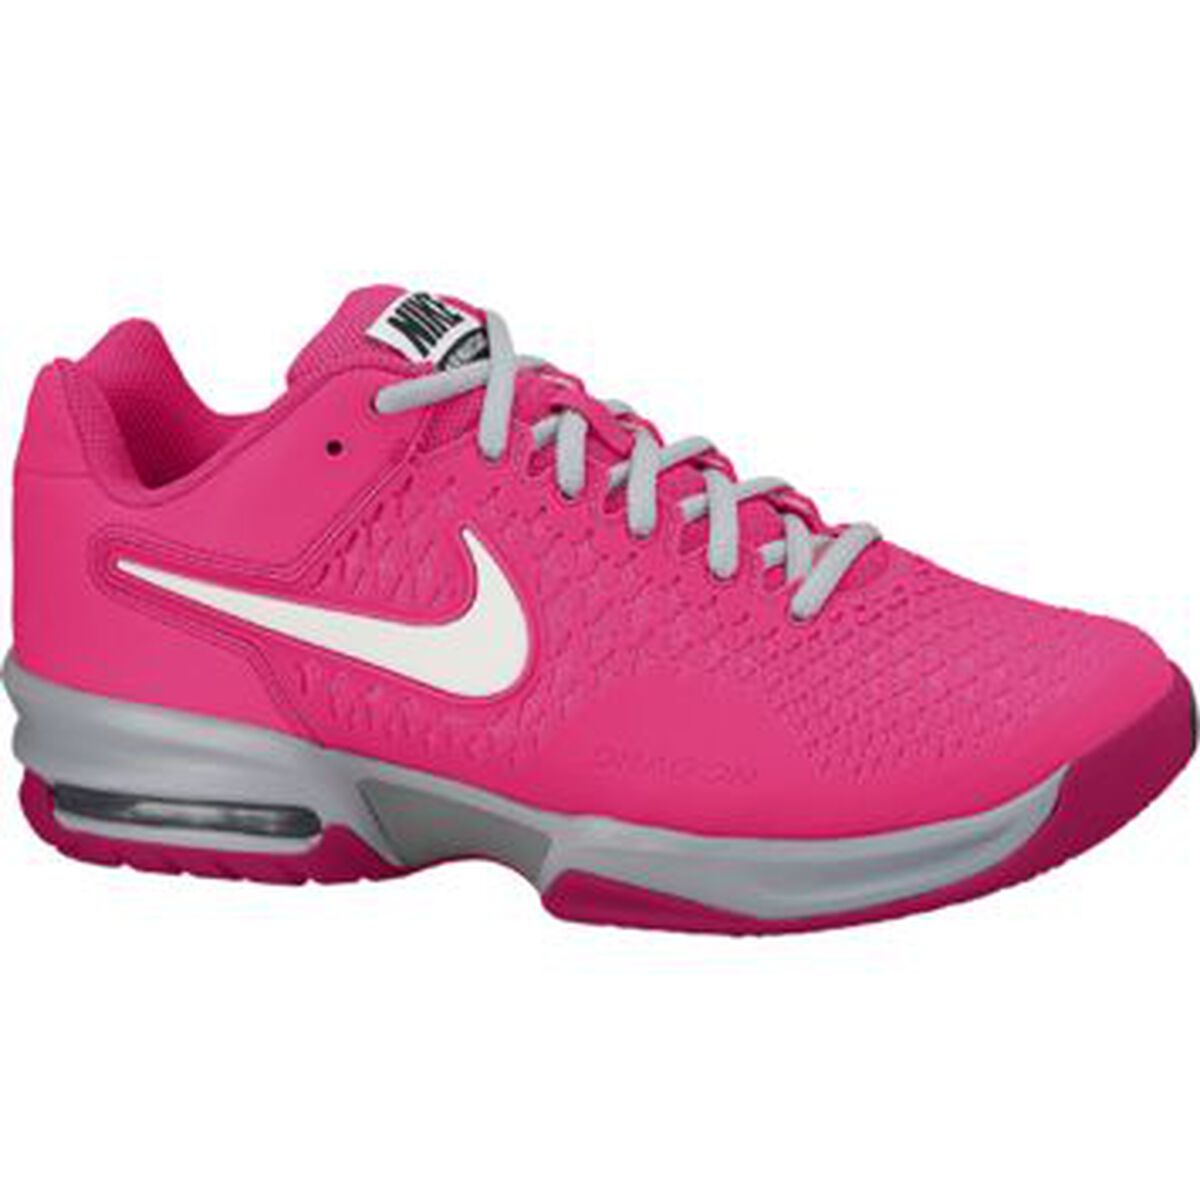 NIke Air Max Cage Women #39 s Tennis Shoe Hyper Pink PGA TOUR Superstore